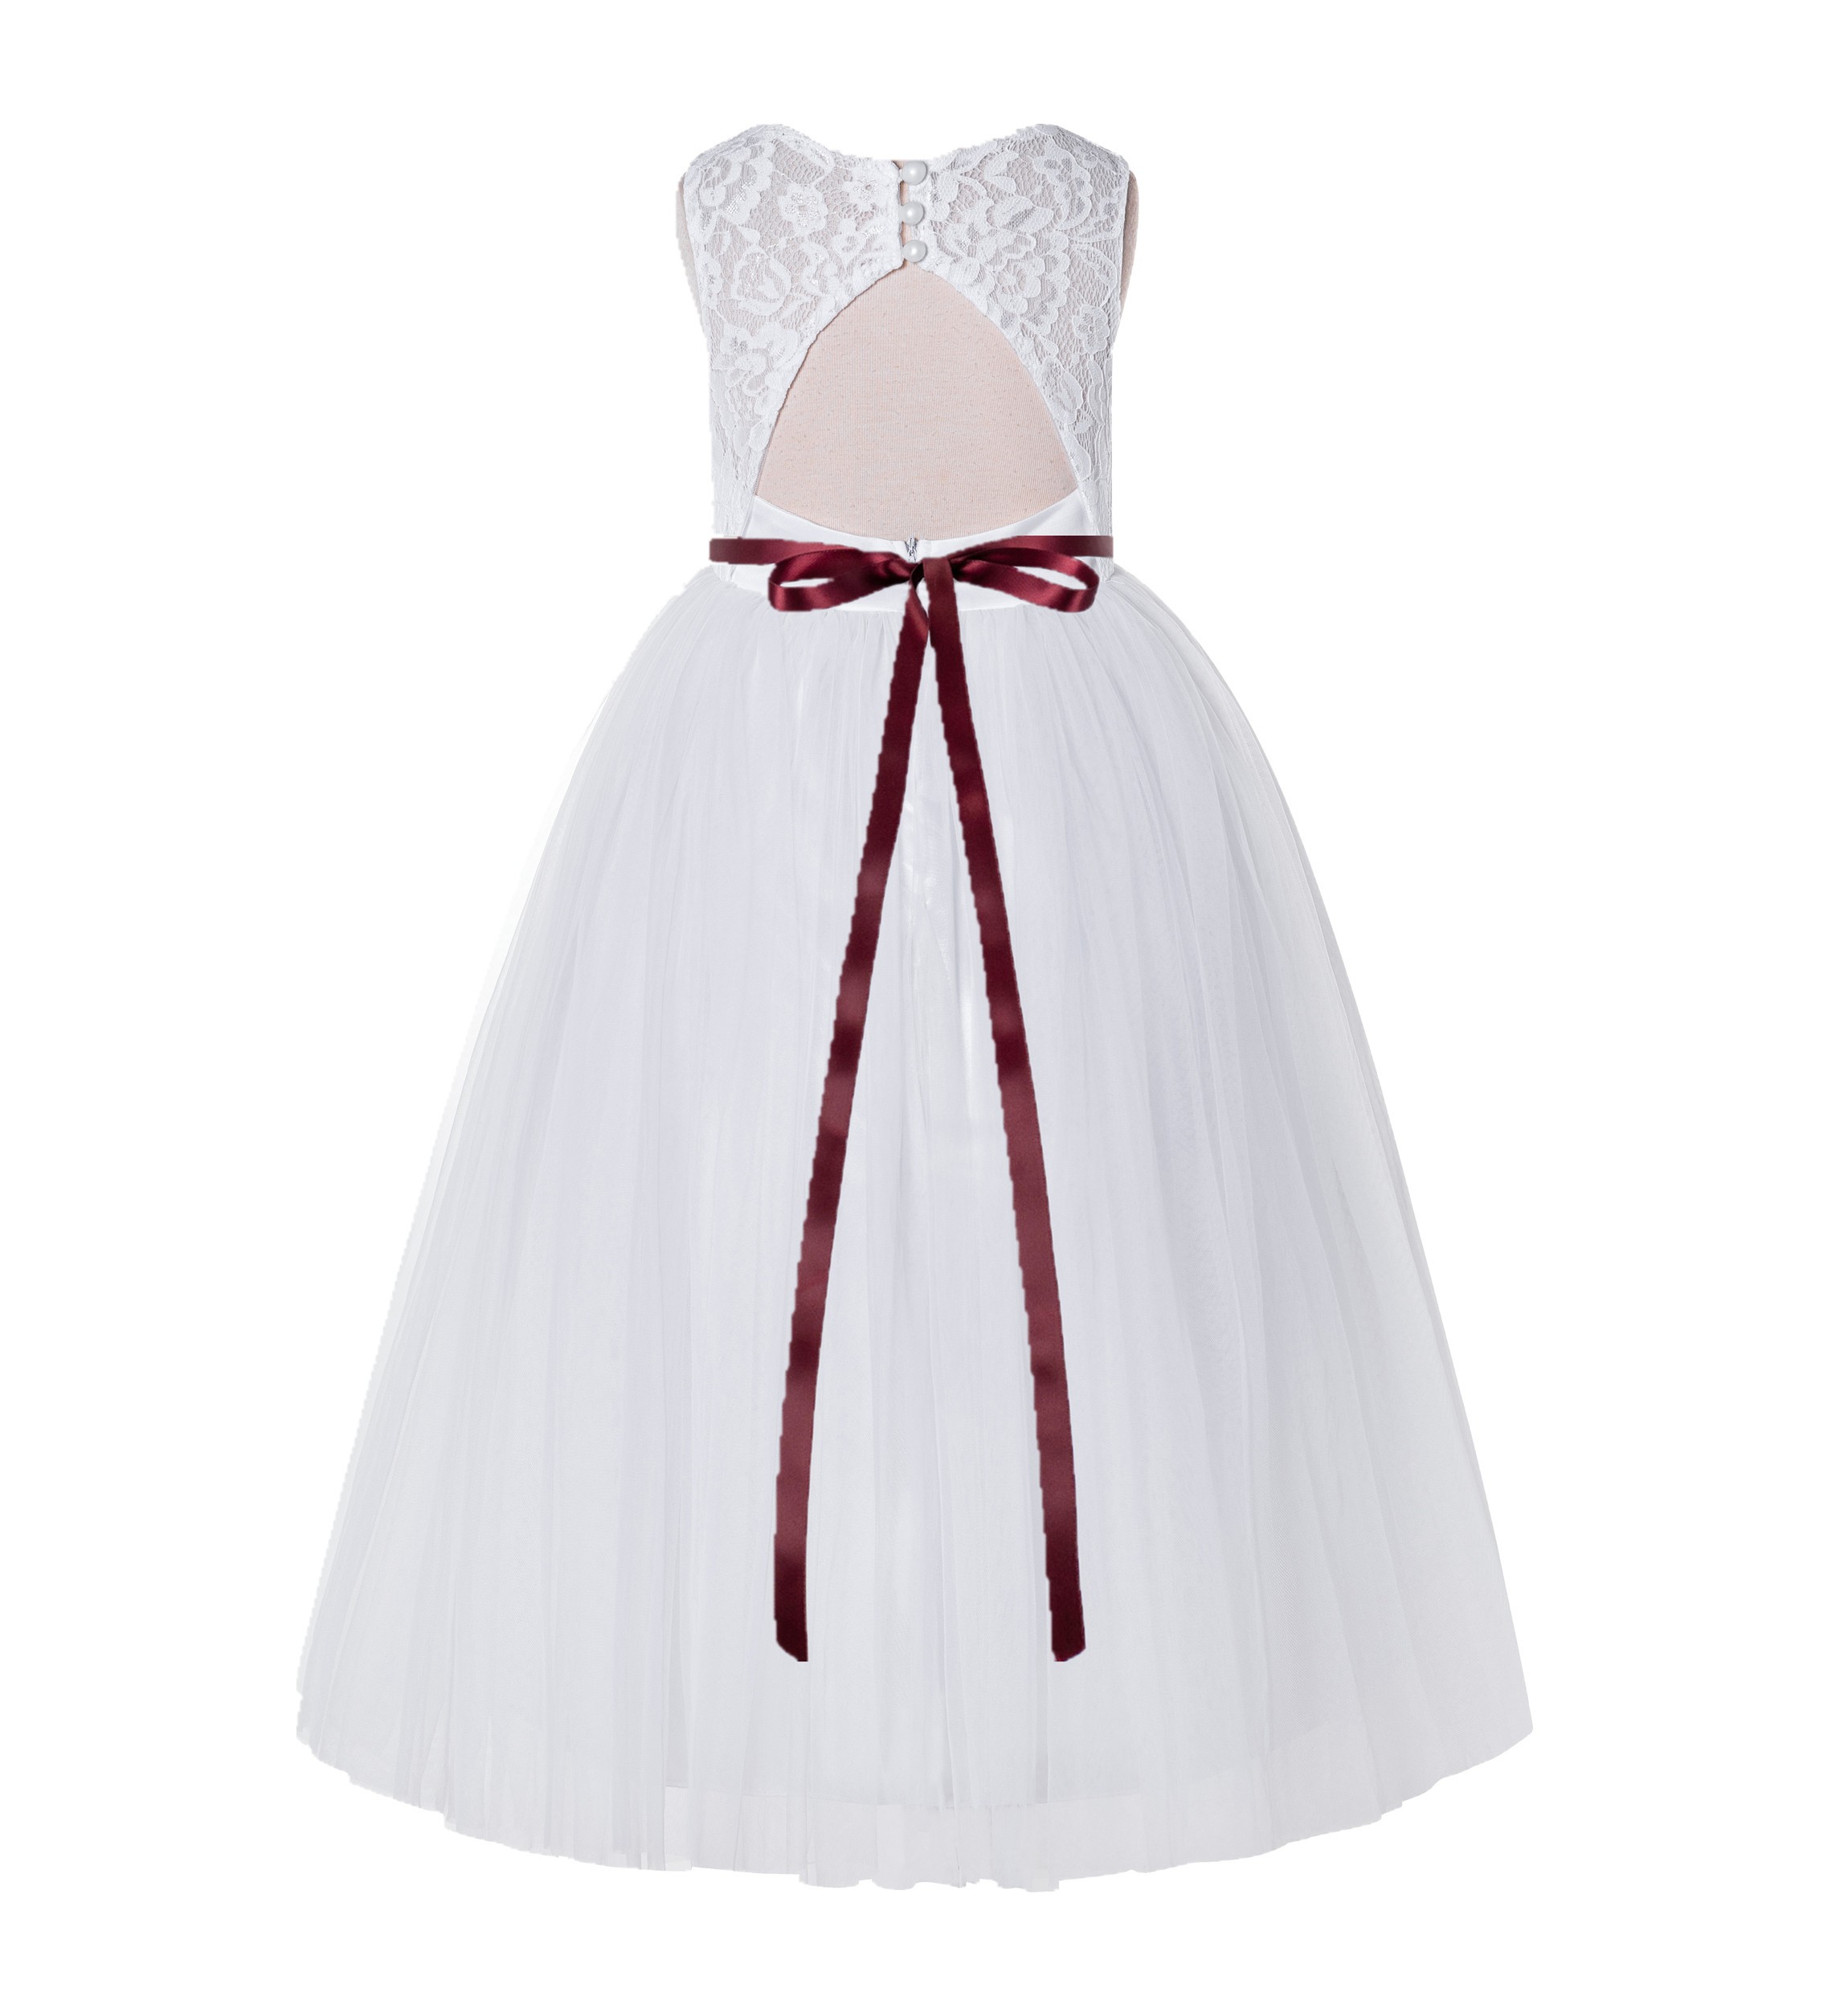 White / Burgundy A-Line Tulle Lace Flower Girl Dress 178R7